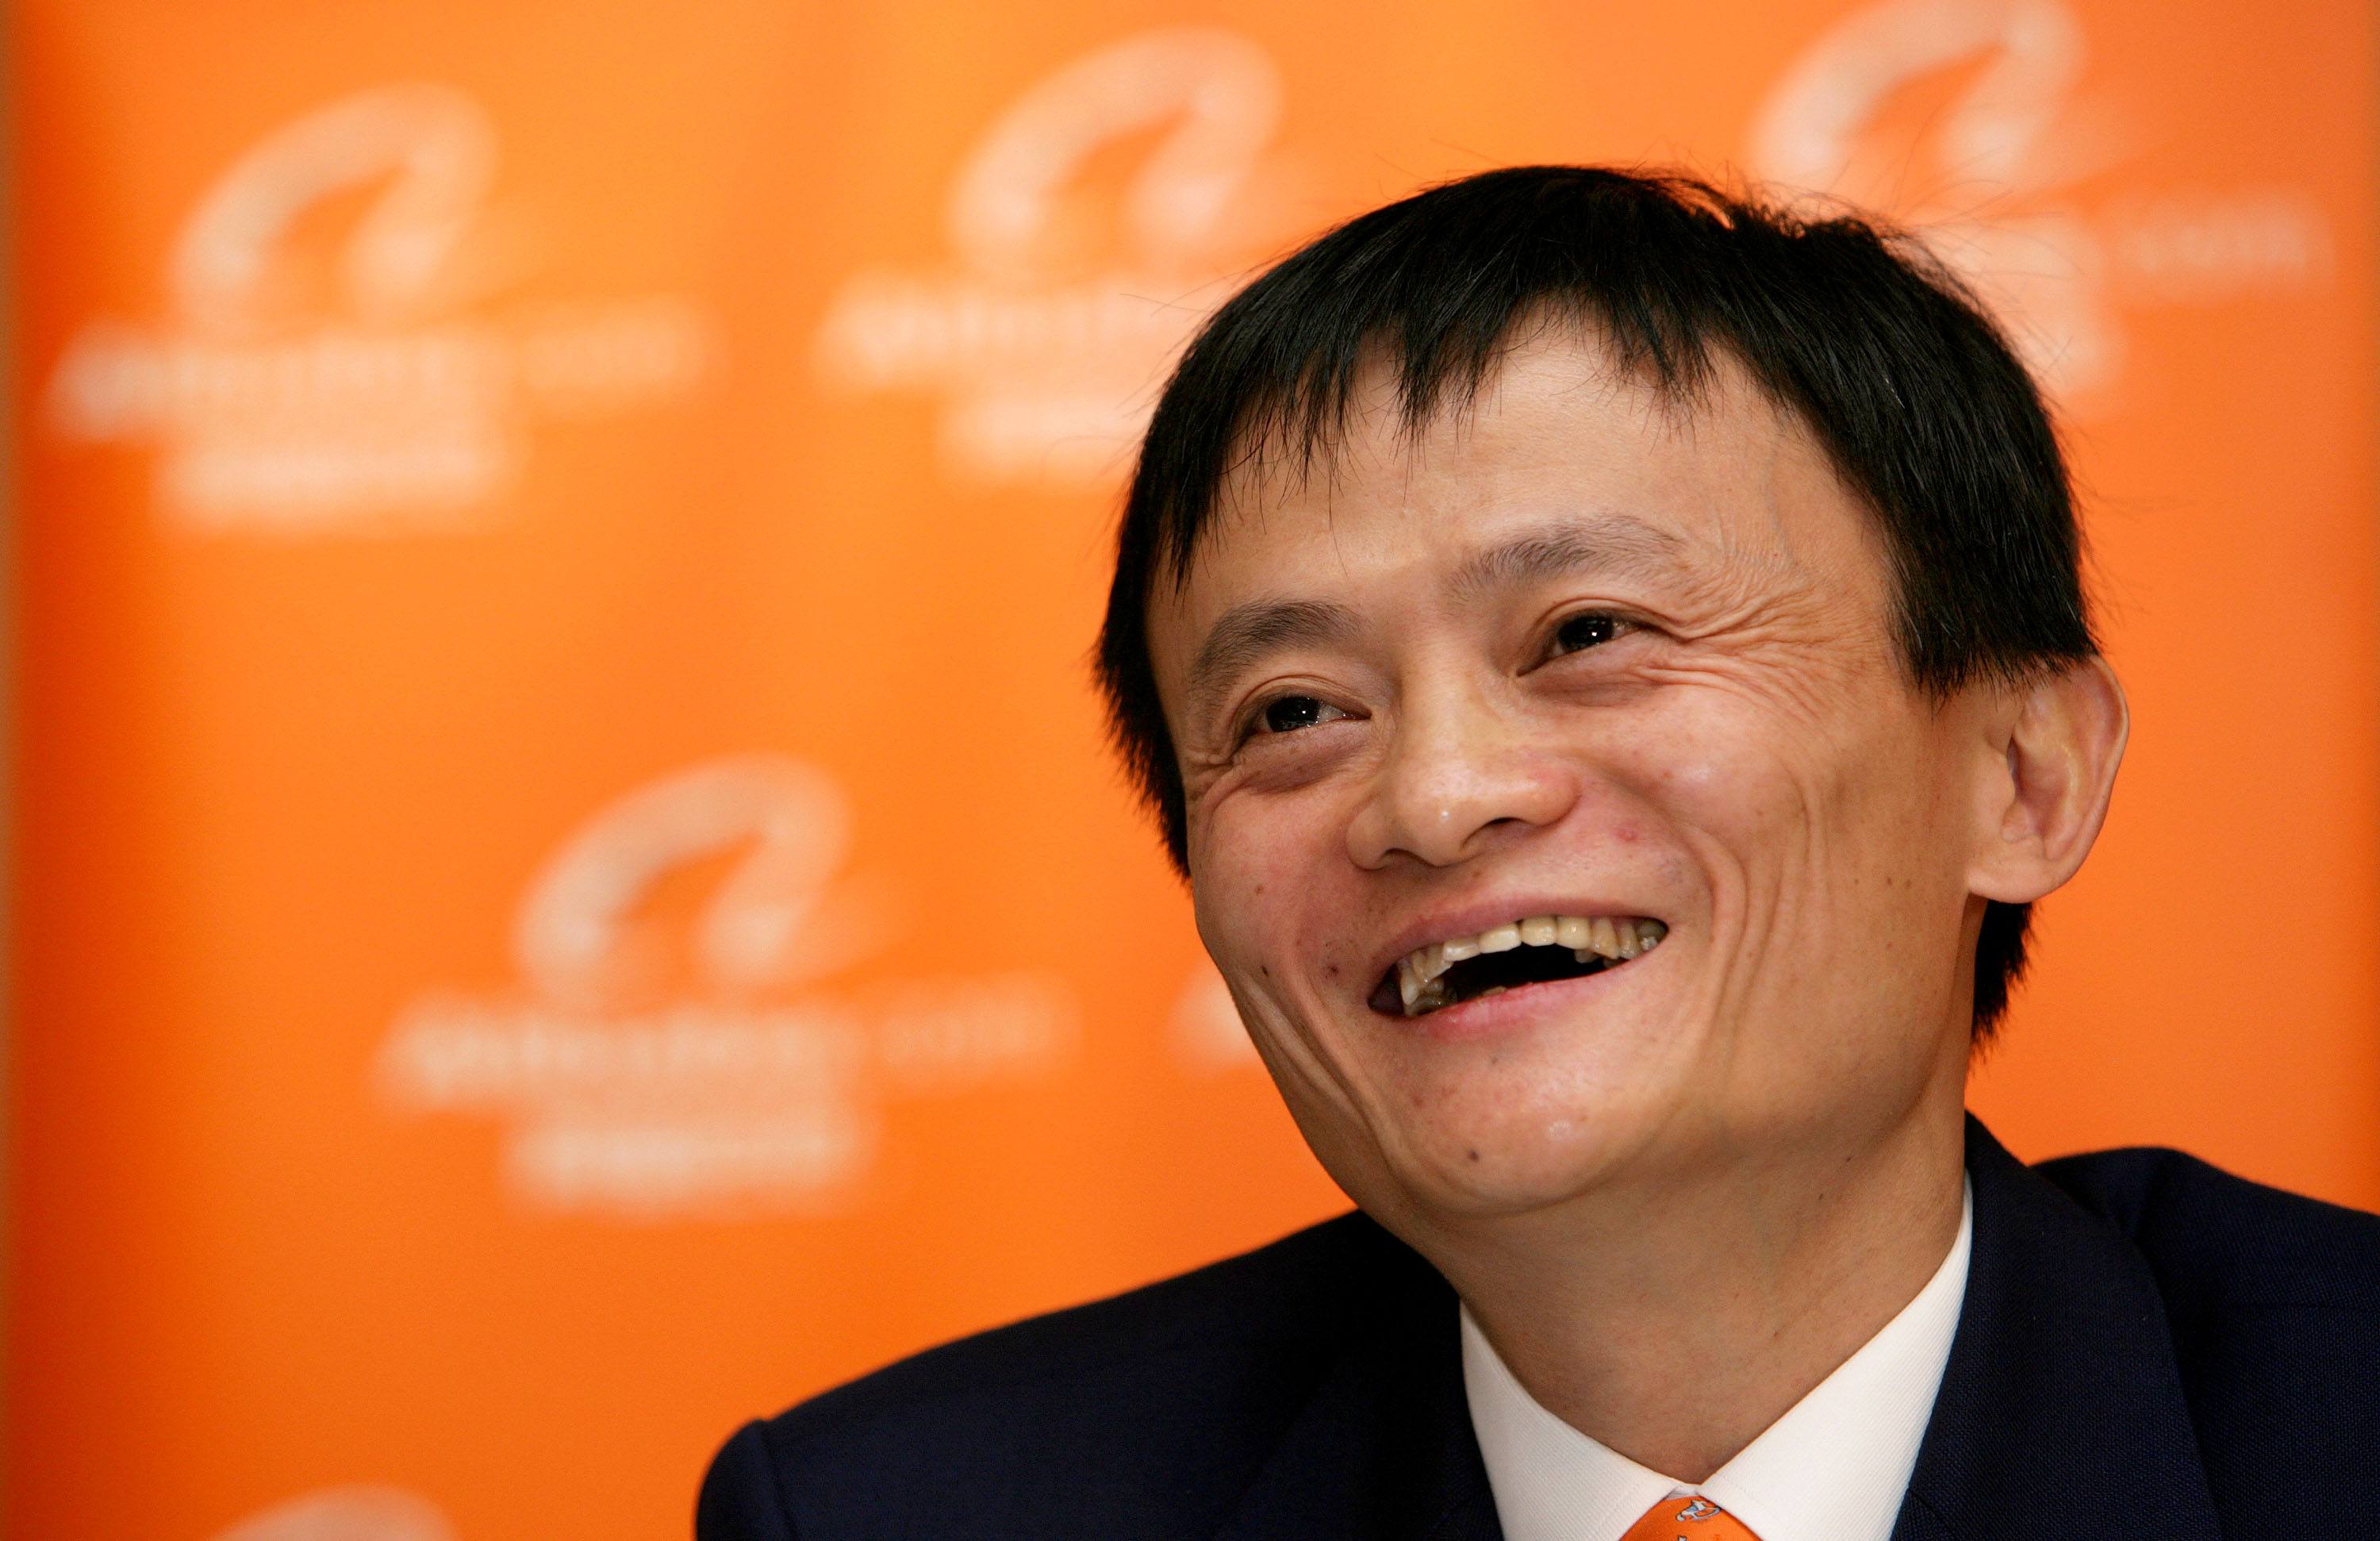 8 Keys to Success from Jack Ma, Self-Made Billionaire and CEO of Alibaba